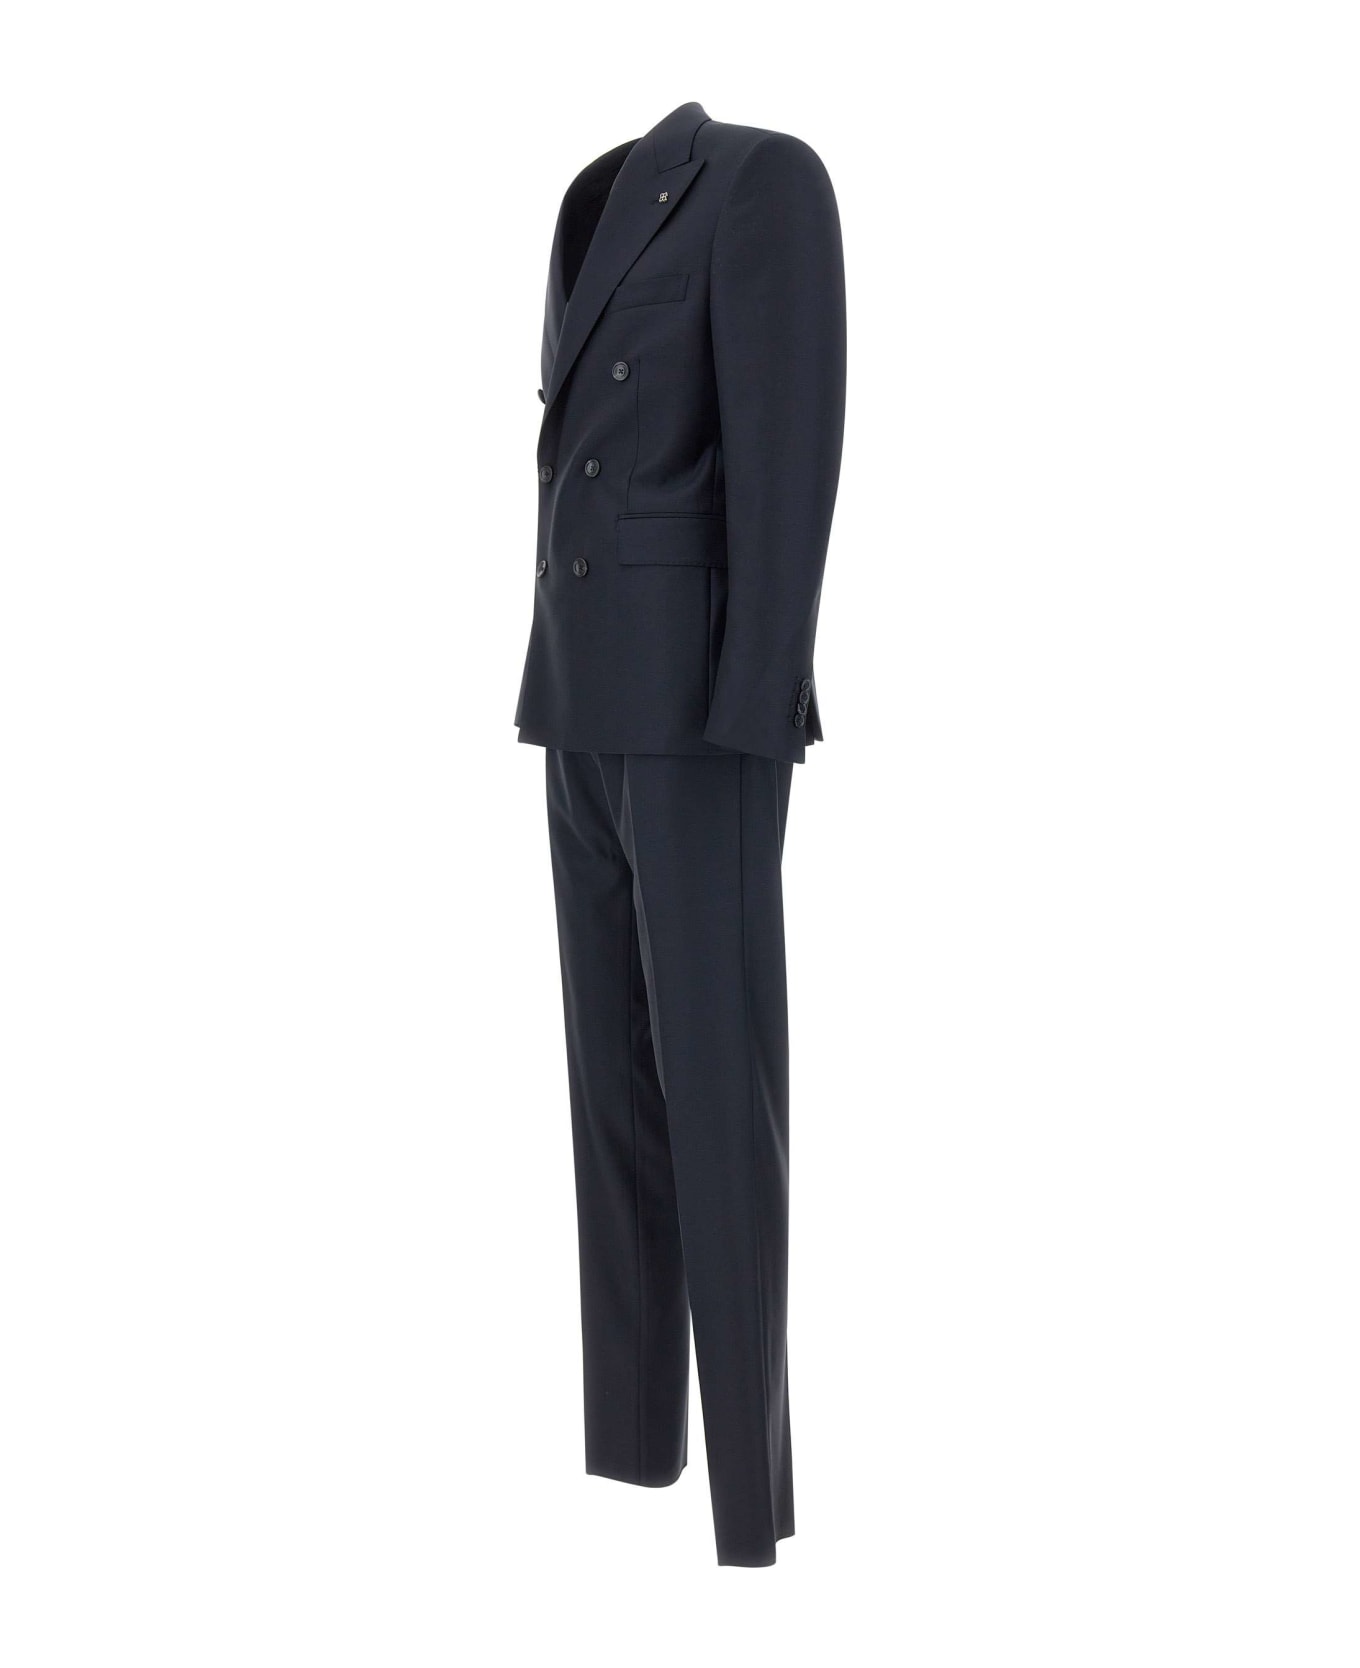 Tagliatore Cool Super 130's Wool Two-piece Suit - BLUE スーツ